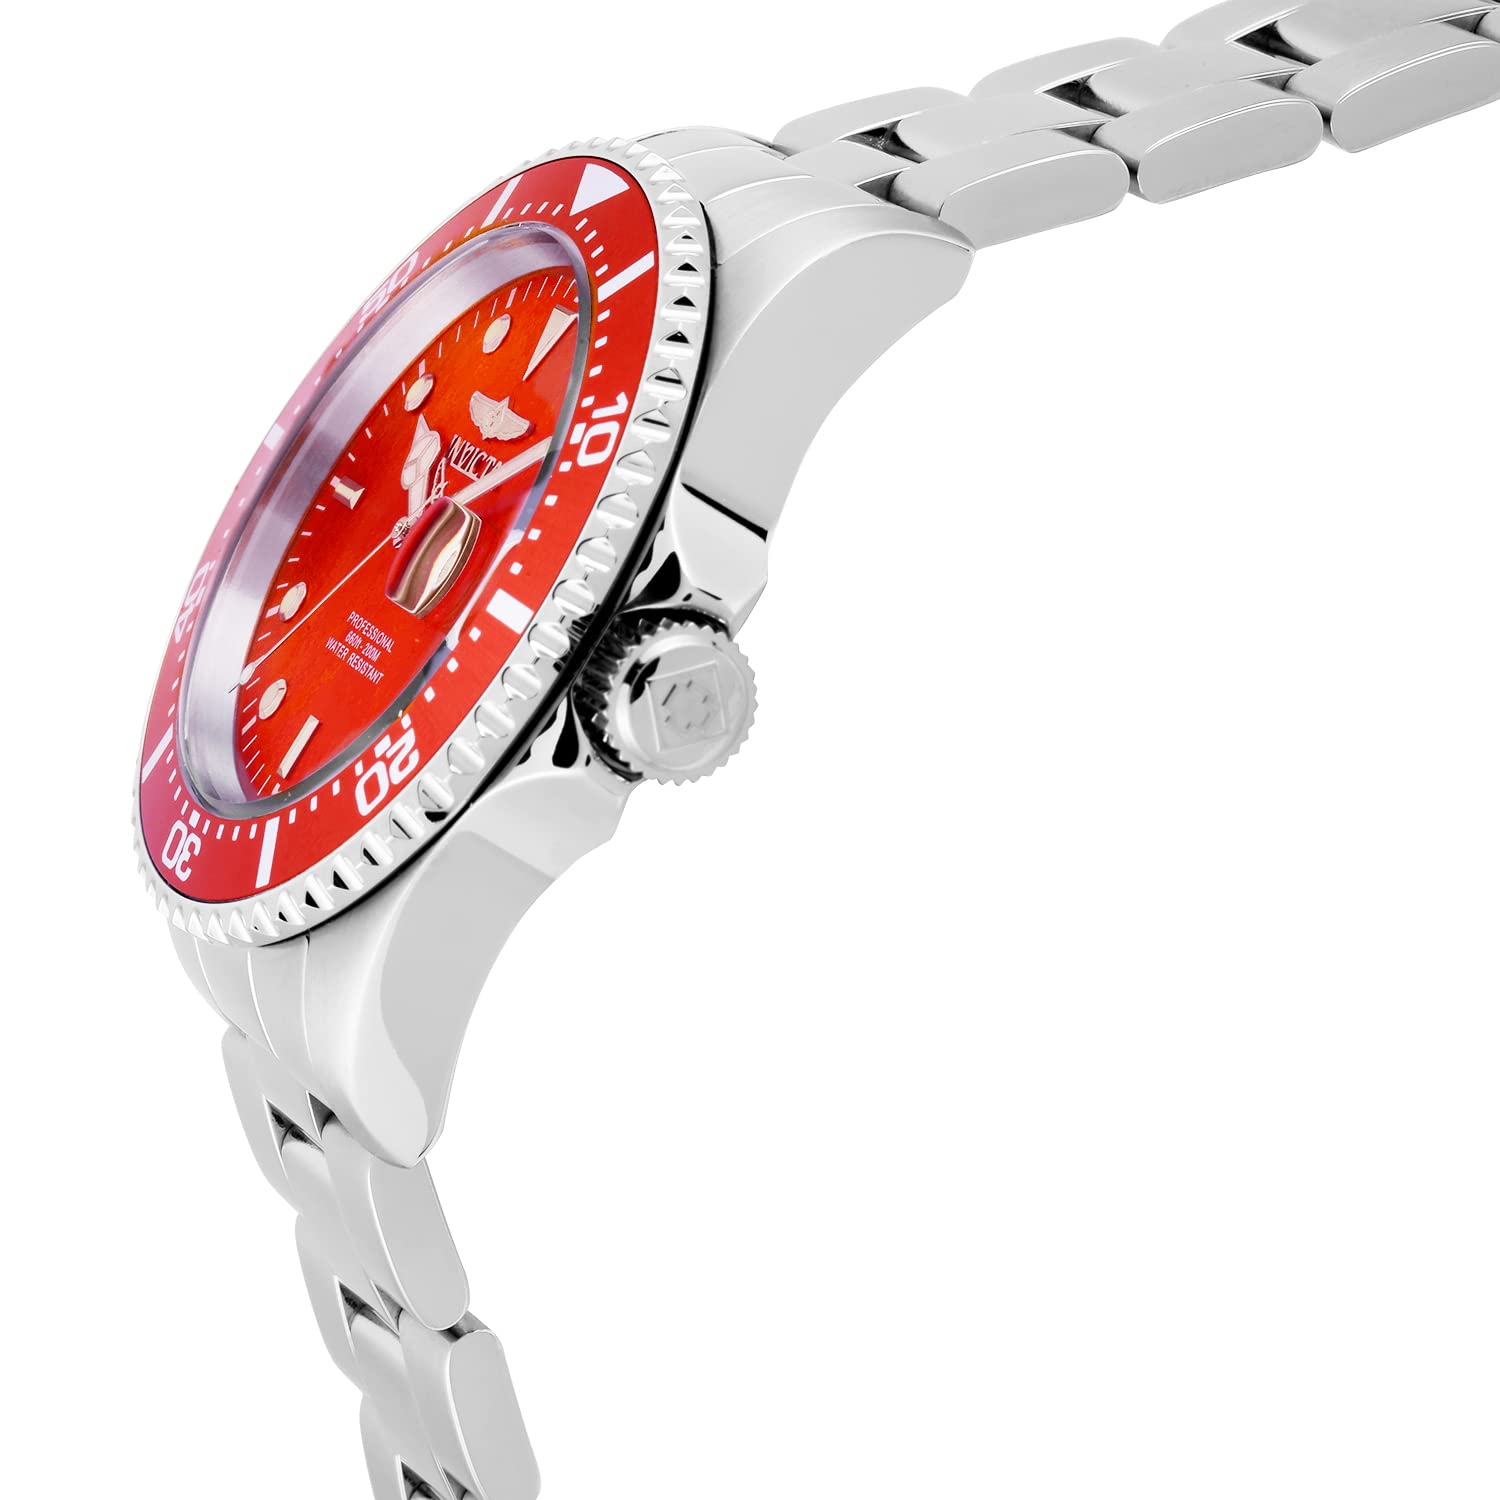 Invicta Men's Pro Diver 43mm Stainless Steel Quartz Watch, Silver/Red, Silver/Blue (Model: 22048, 25716)